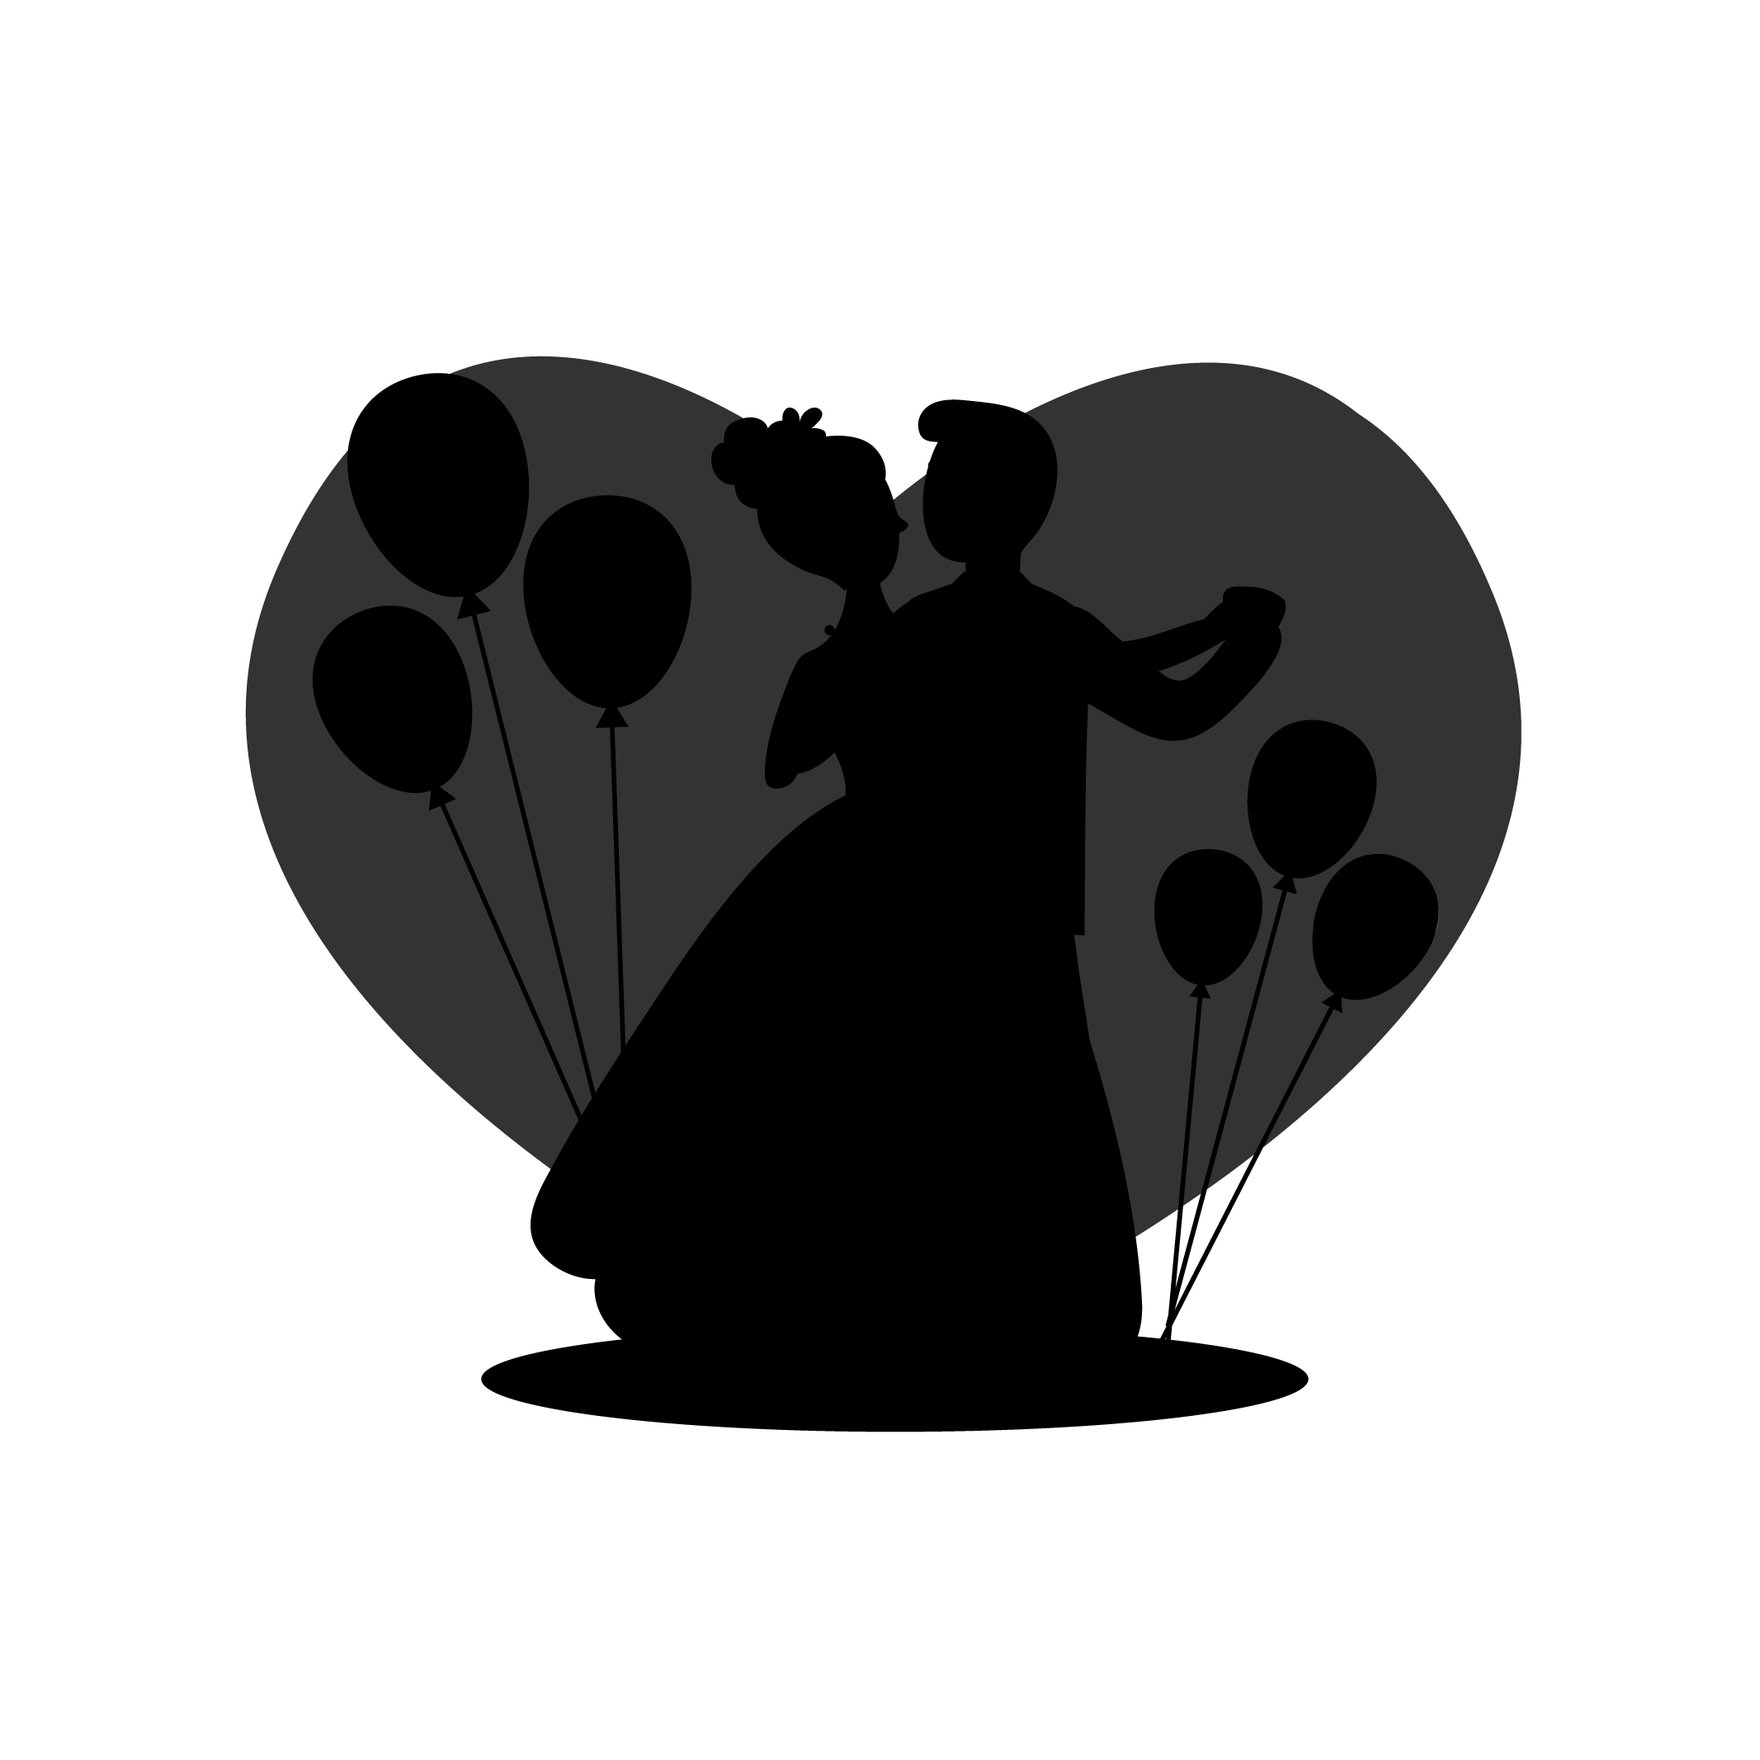 Free Wedding Event Silhouette in Illustrator, EPS, SVG, JPG, PNG